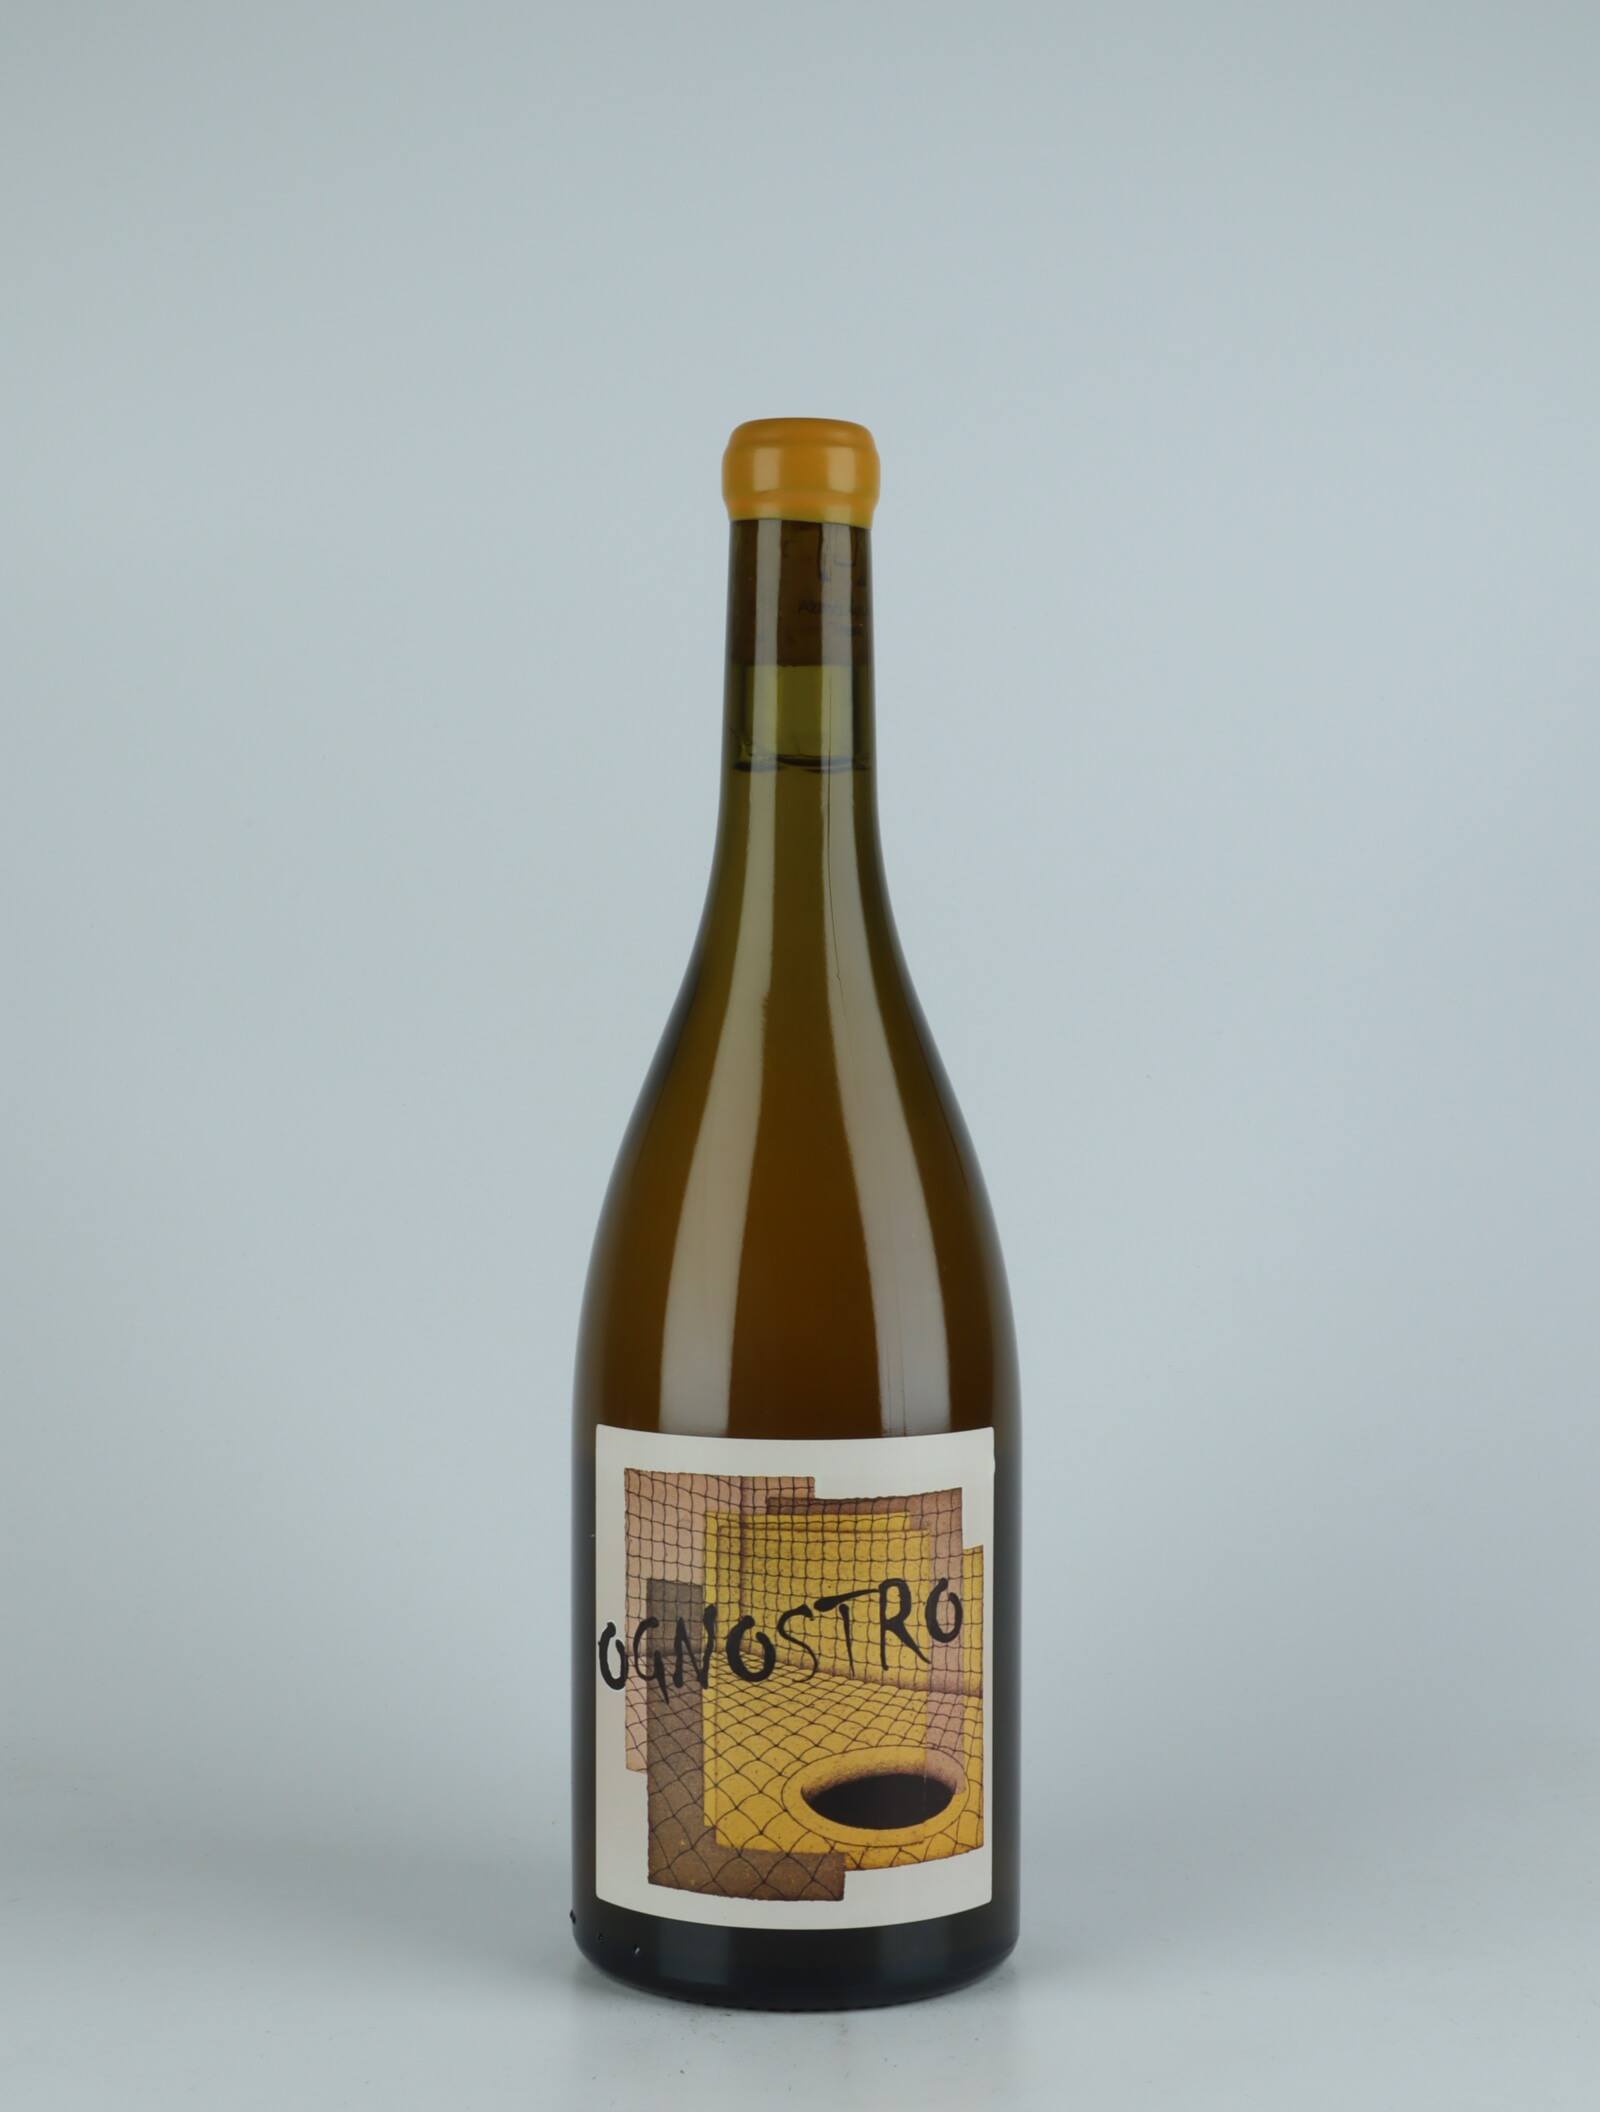 A bottle 2020 Ognostro Bianco White wine from Marco Tinessa, Campania in Italy